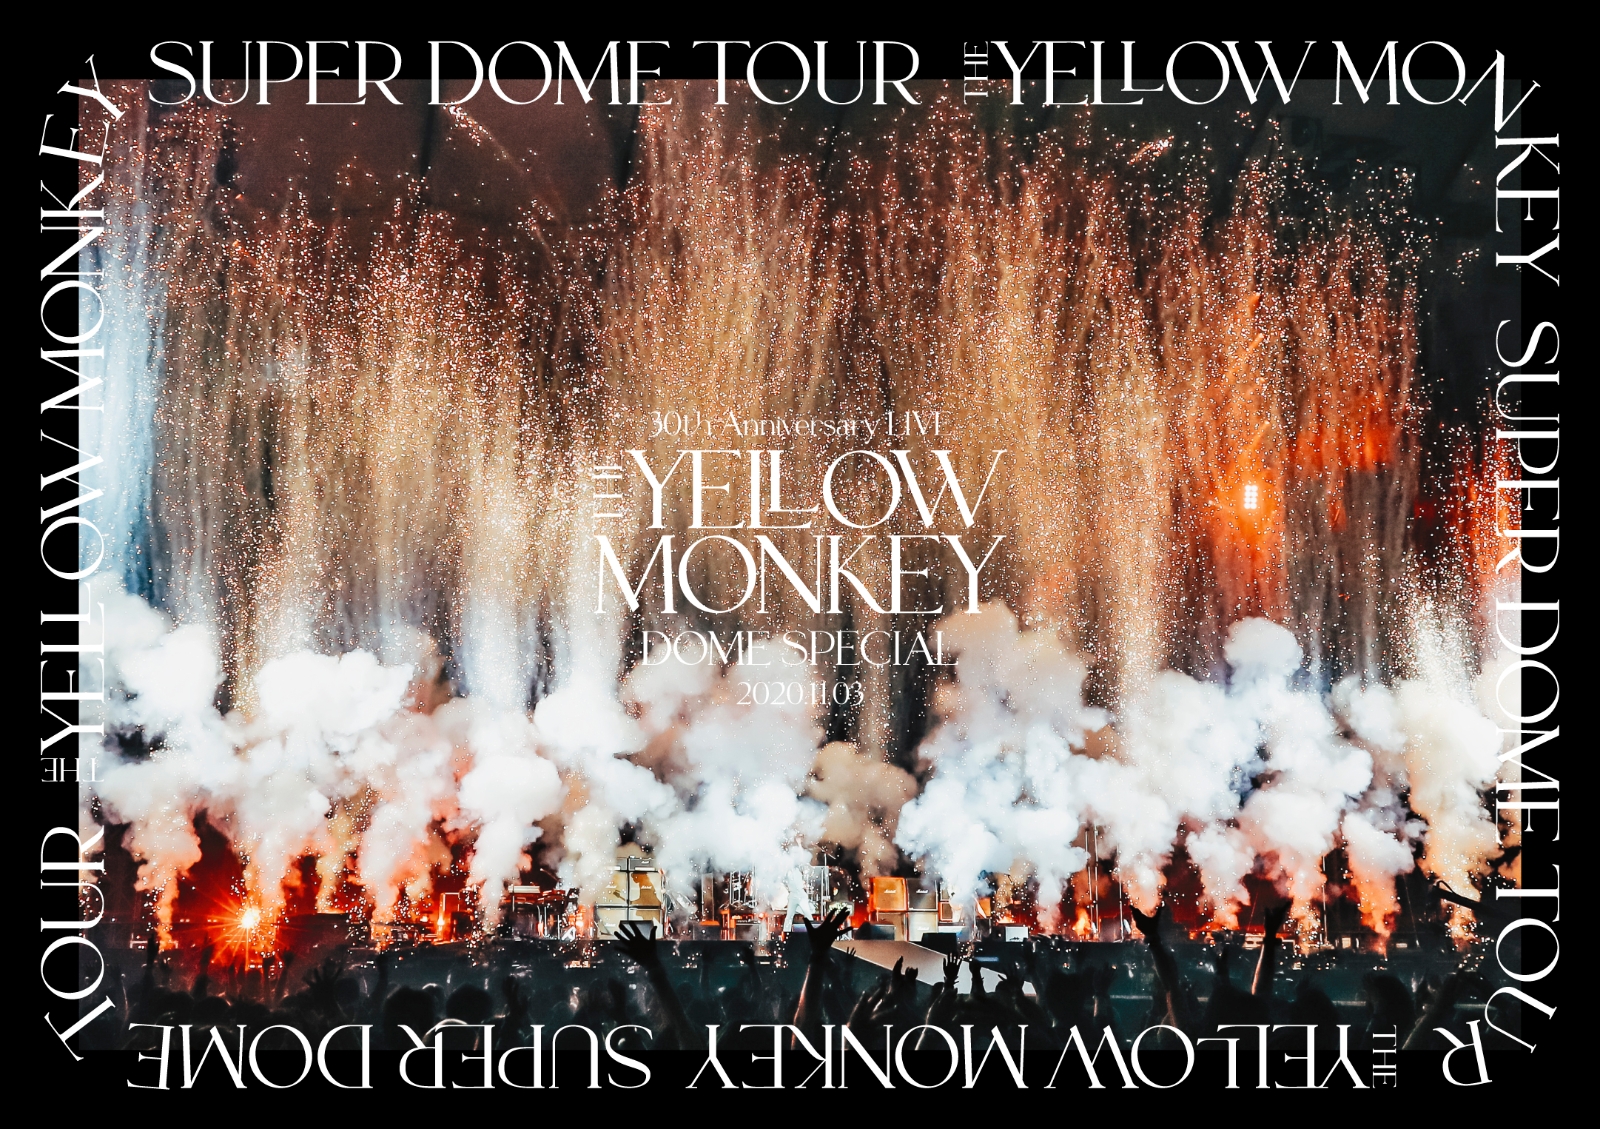 THE YELLOW MONKEY 30th Anniversary LIVE -DOME SPECIAL- 2020.11.3画像